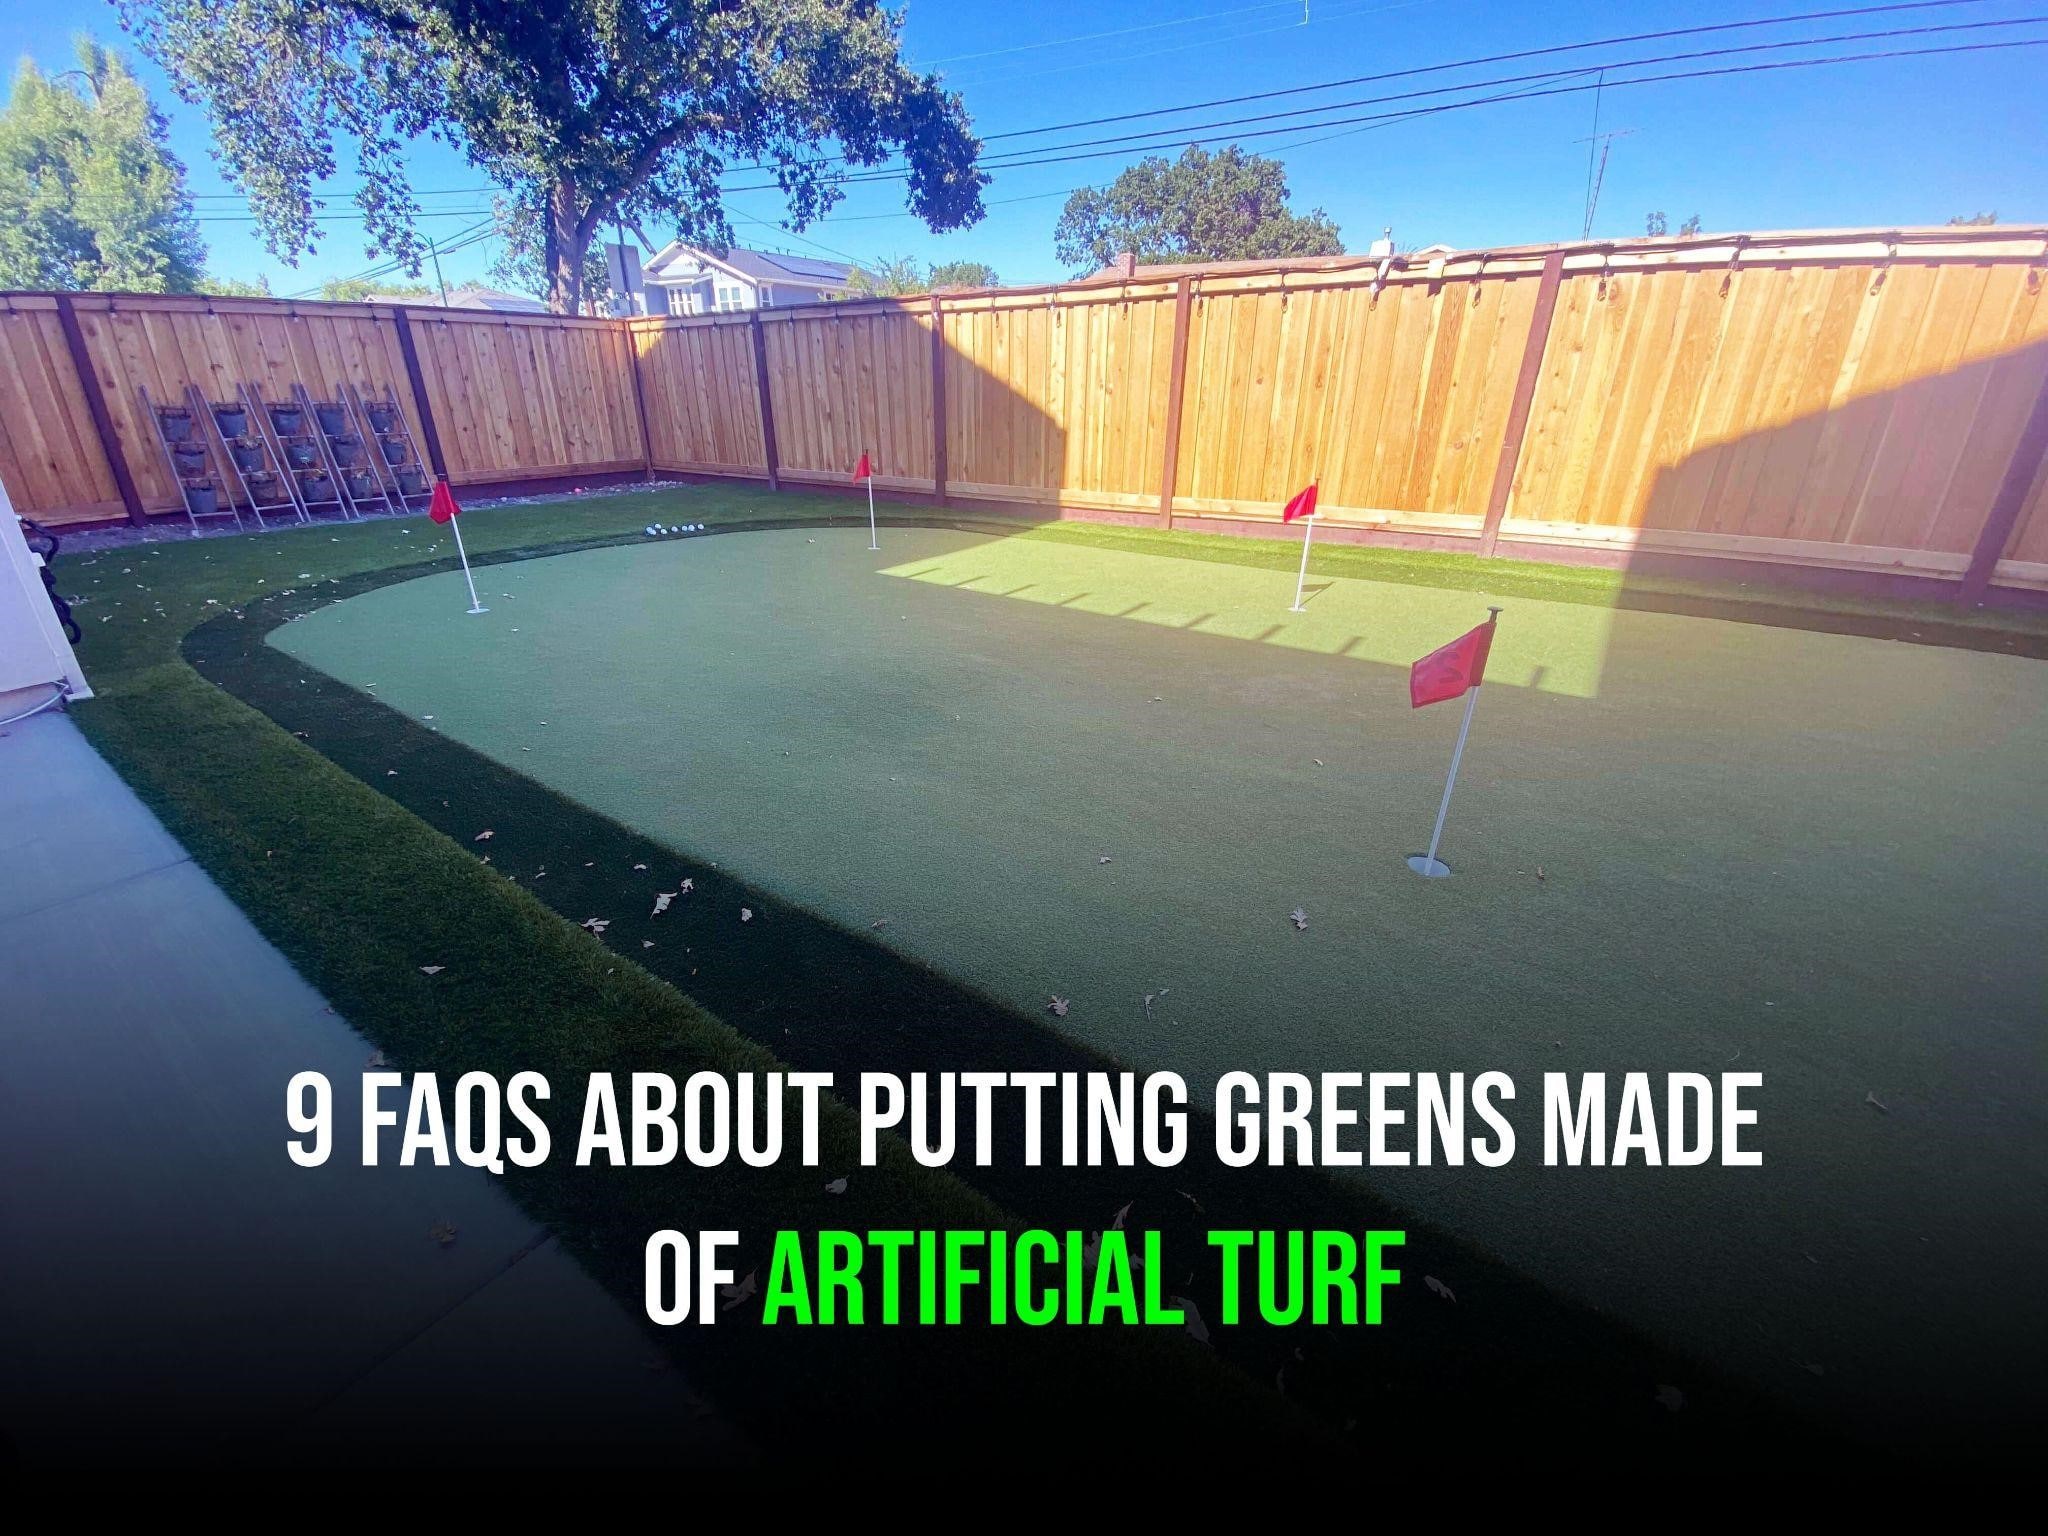 9 FAQs About Putting Greens Made of Artificial Turf in Houston